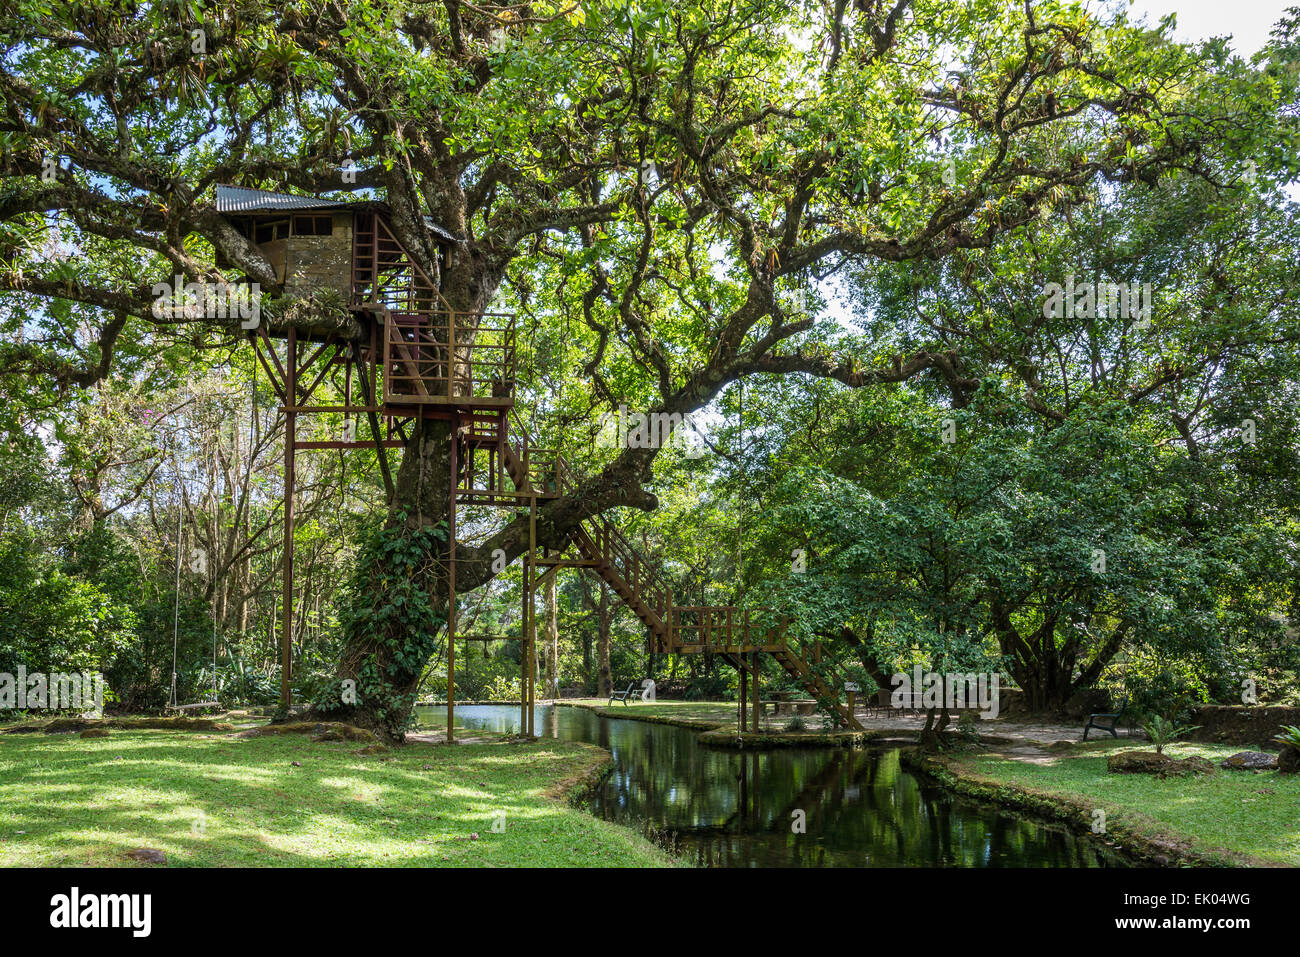 A tree-house under the canopy of a giant oak tree. Panama, Central America. Stock Photo